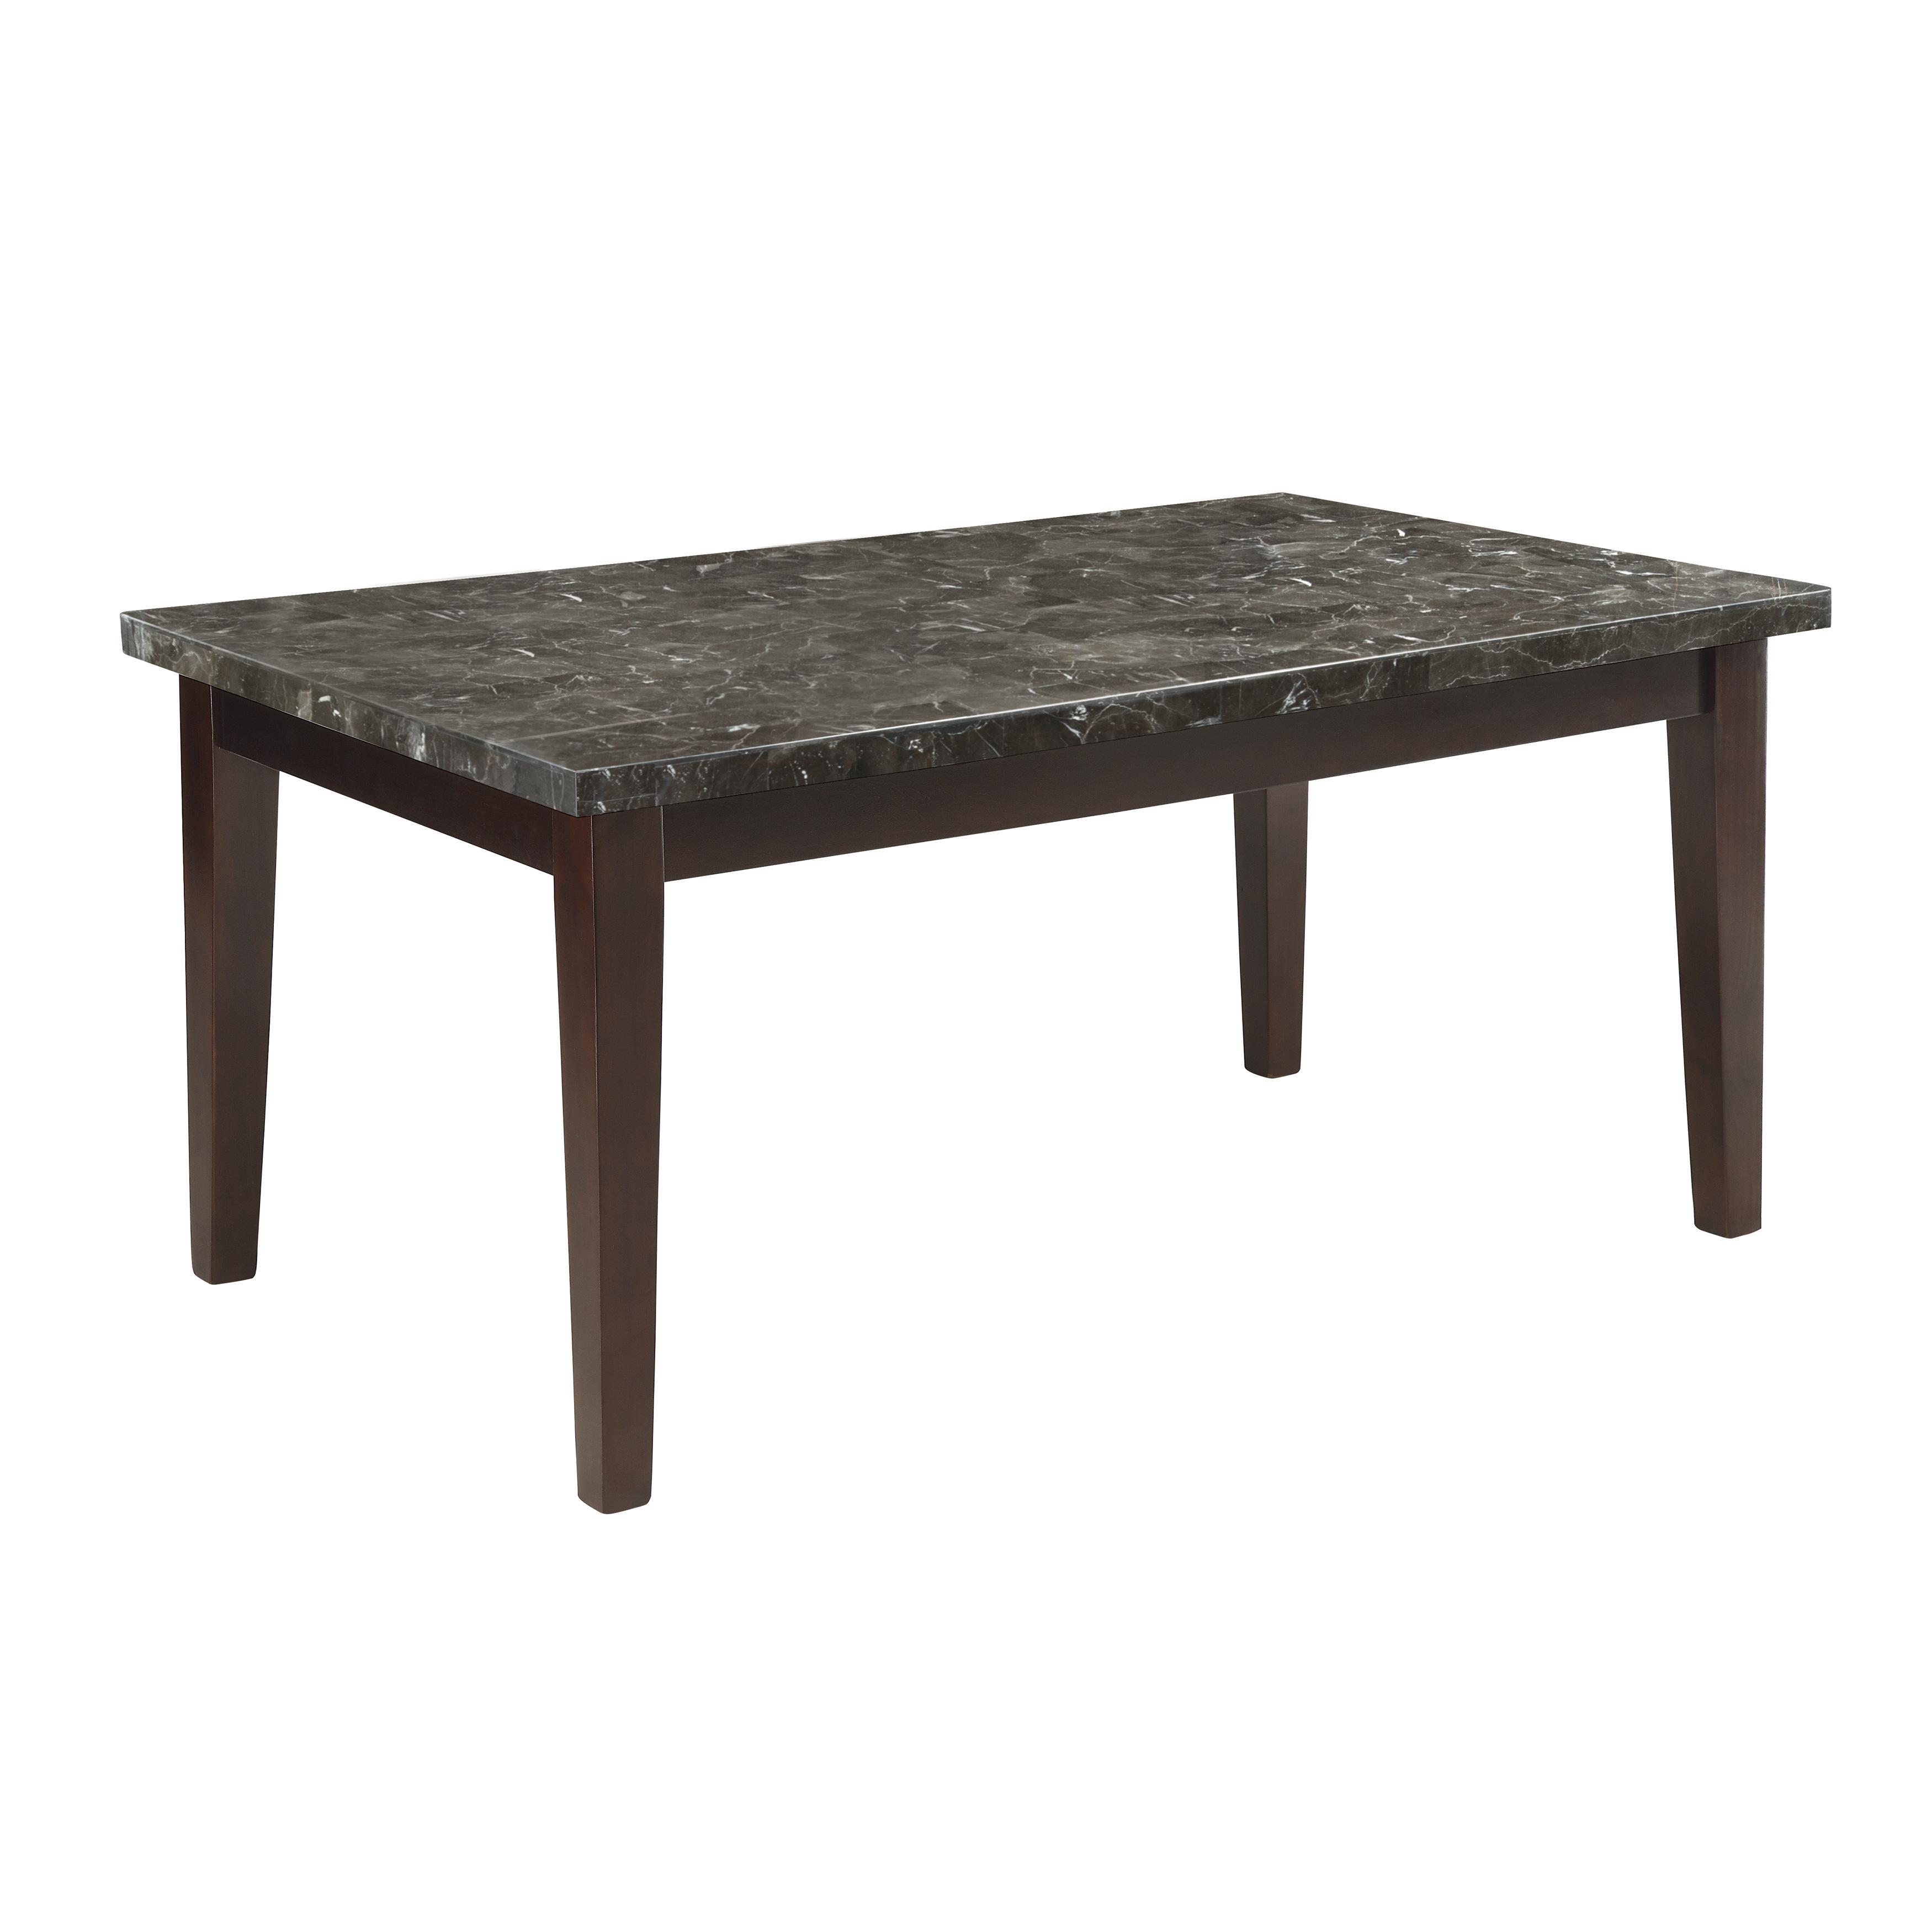 Transitional Dining Table 2456-64 Decatur 2456-64 in Espresso, Black 